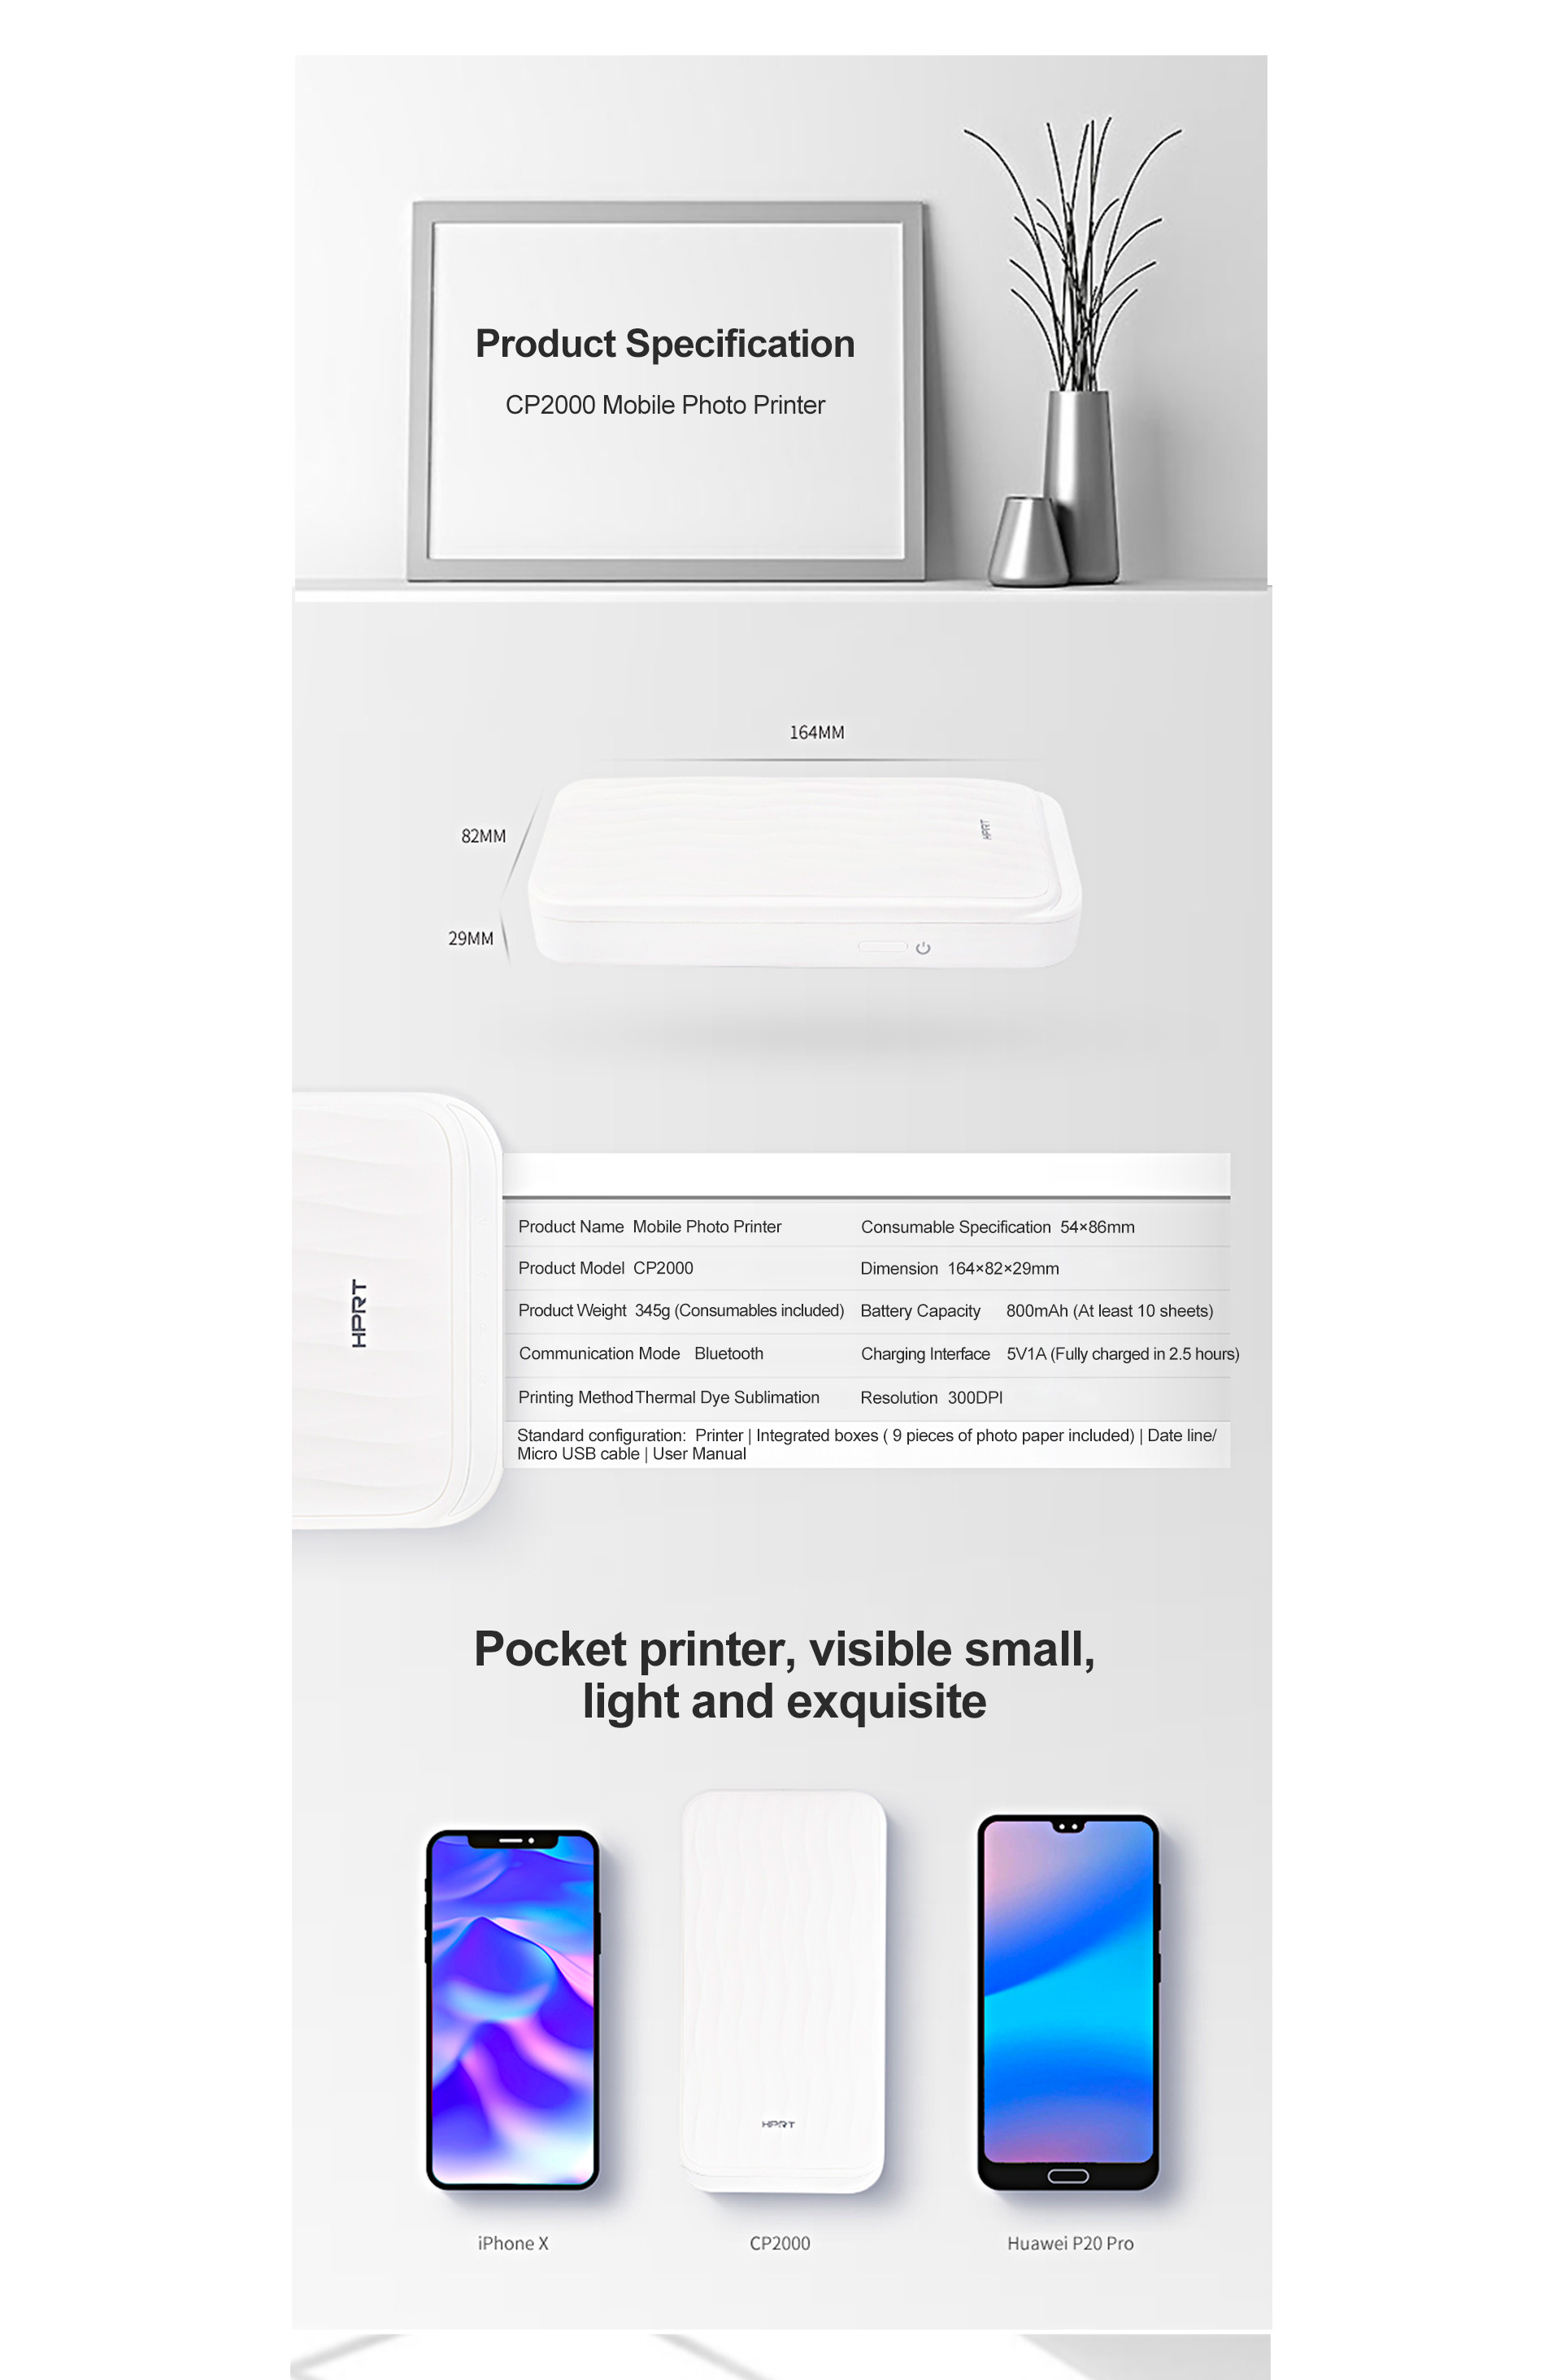 photo printer fit into your pocket